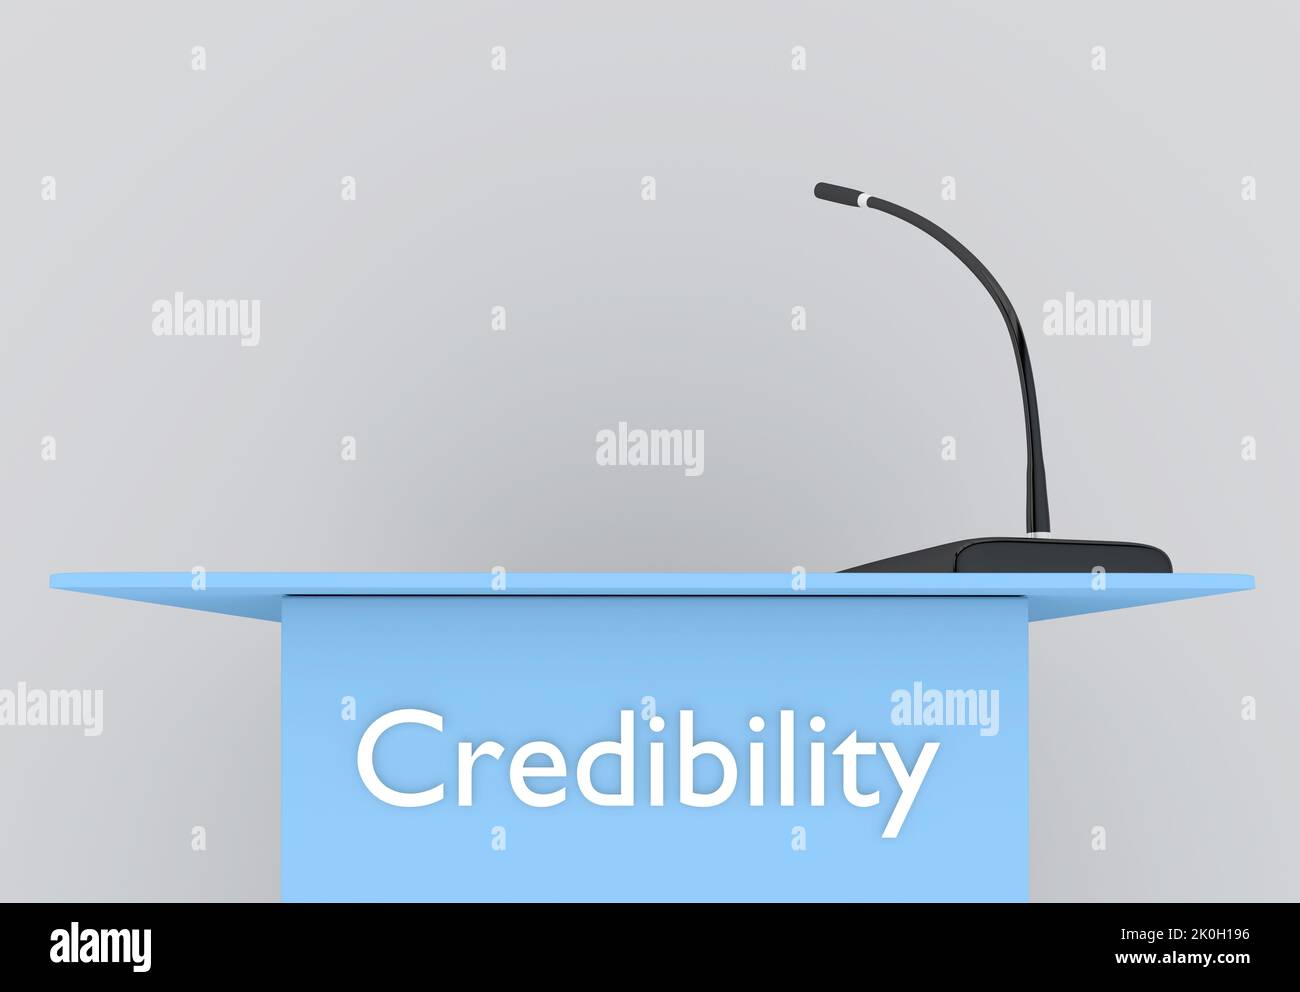 3D illustration of Credibility script on a podium, isolated over gray background. Stock Photo